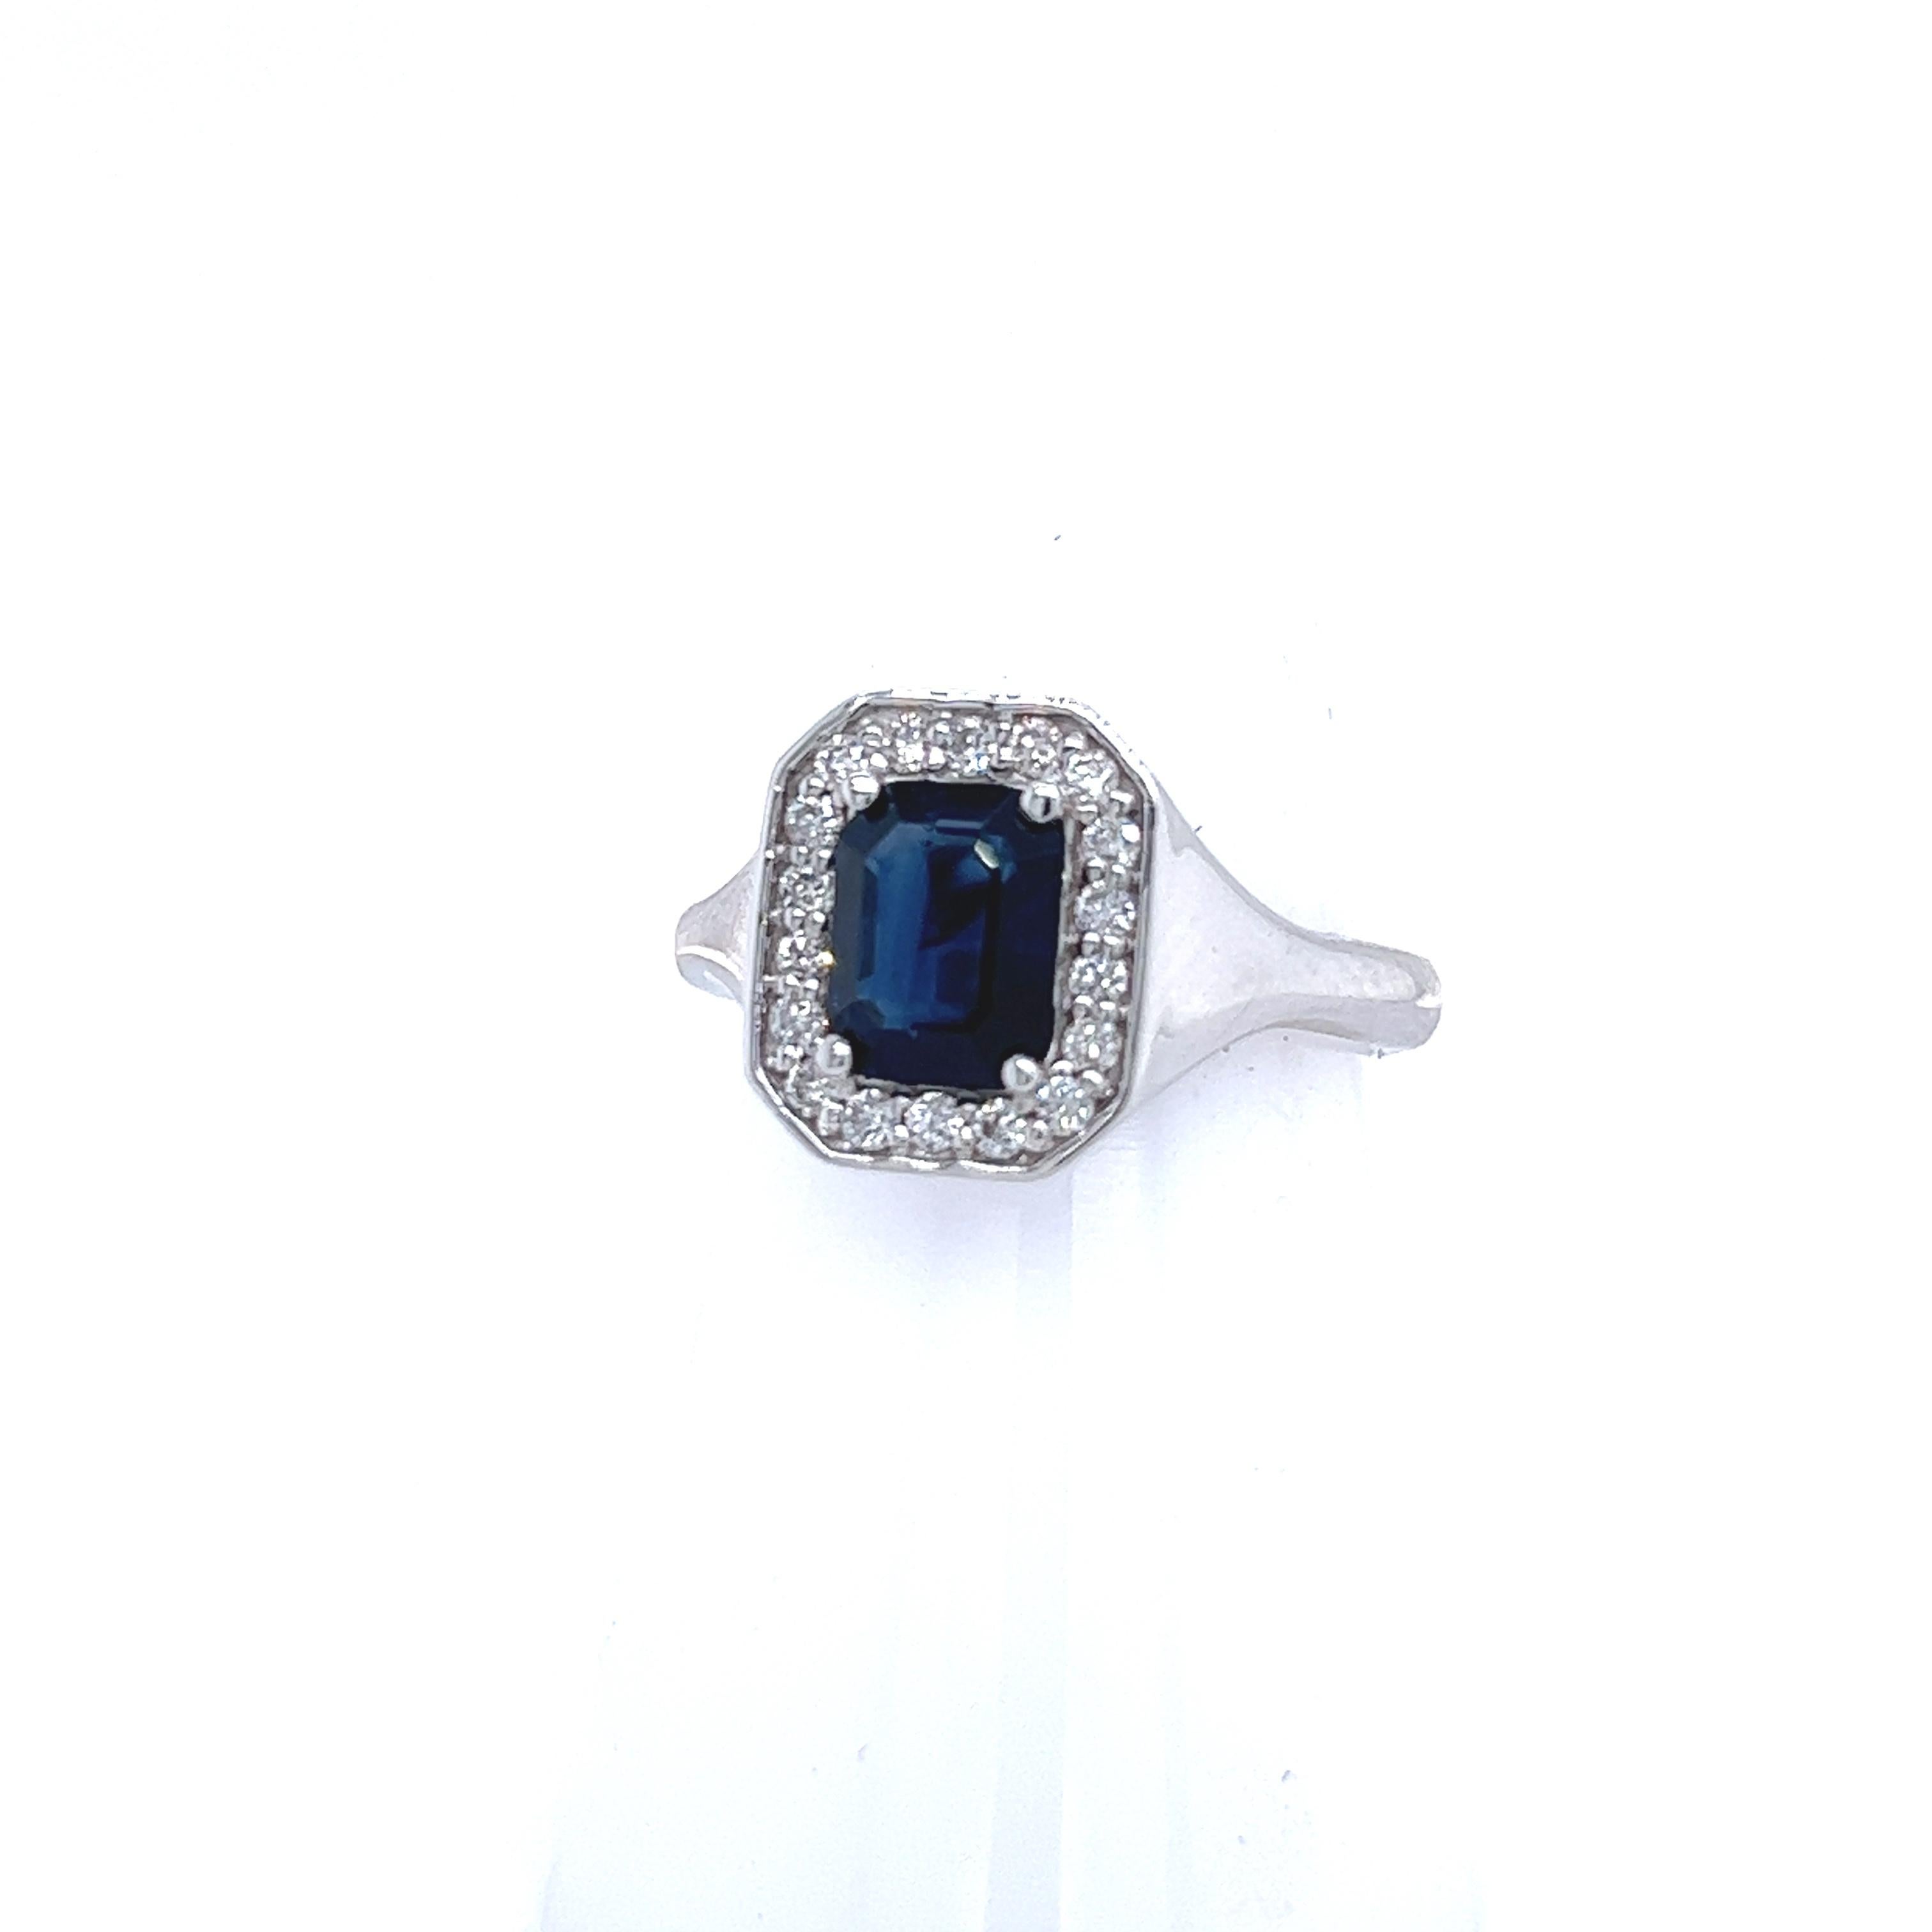 Women's Natural Sapphire Diamond Ring 14k W Gold 1.82 TCW Certified For Sale